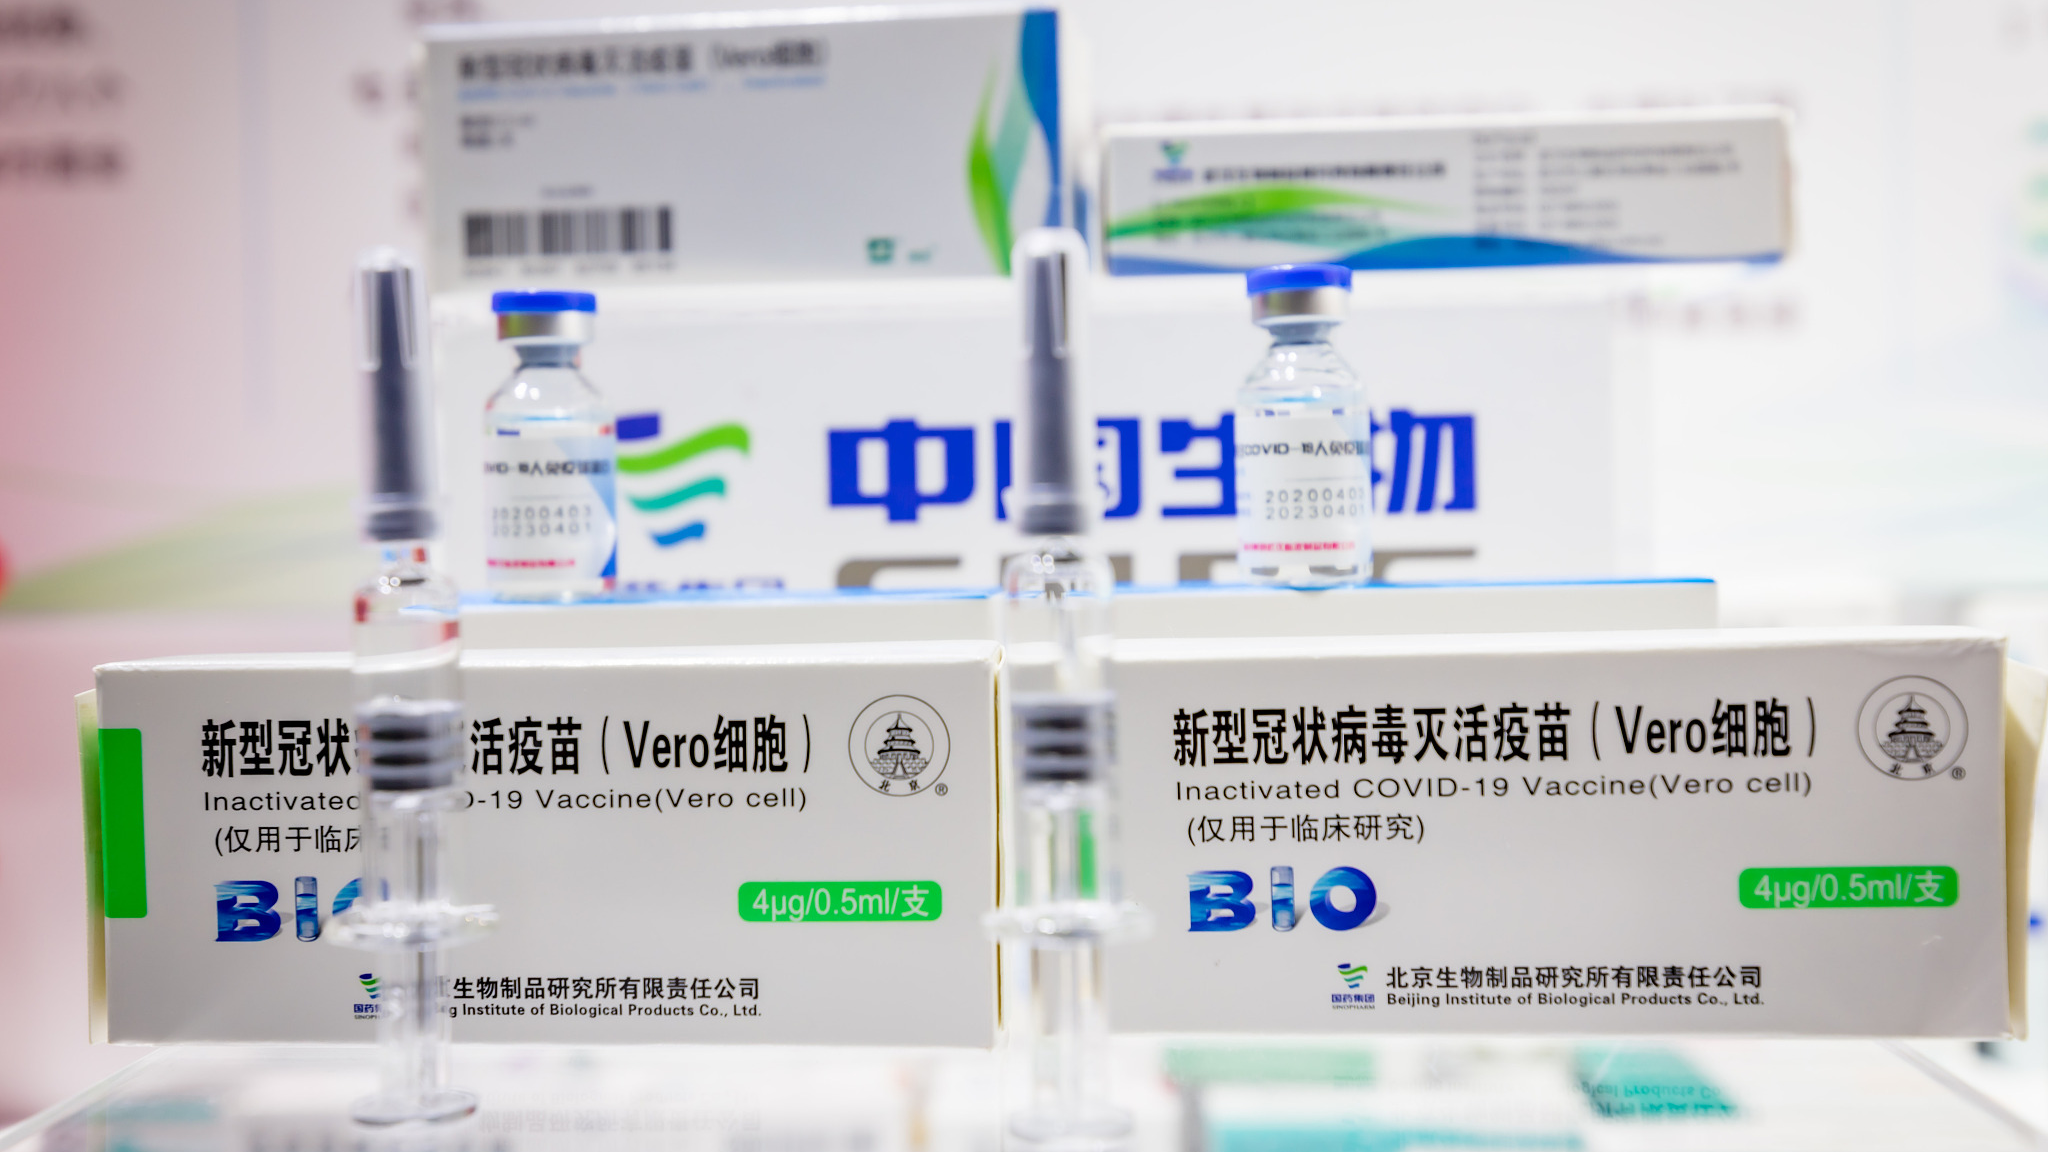 Peru has given ‘exceptional’ approval for the import and use of 1 million COVID-19 vaccines from China’s Sinopharm, two government sources told Reuters on Wednesday, January 27th, as the Andean nation grapples with a new wave of infections.